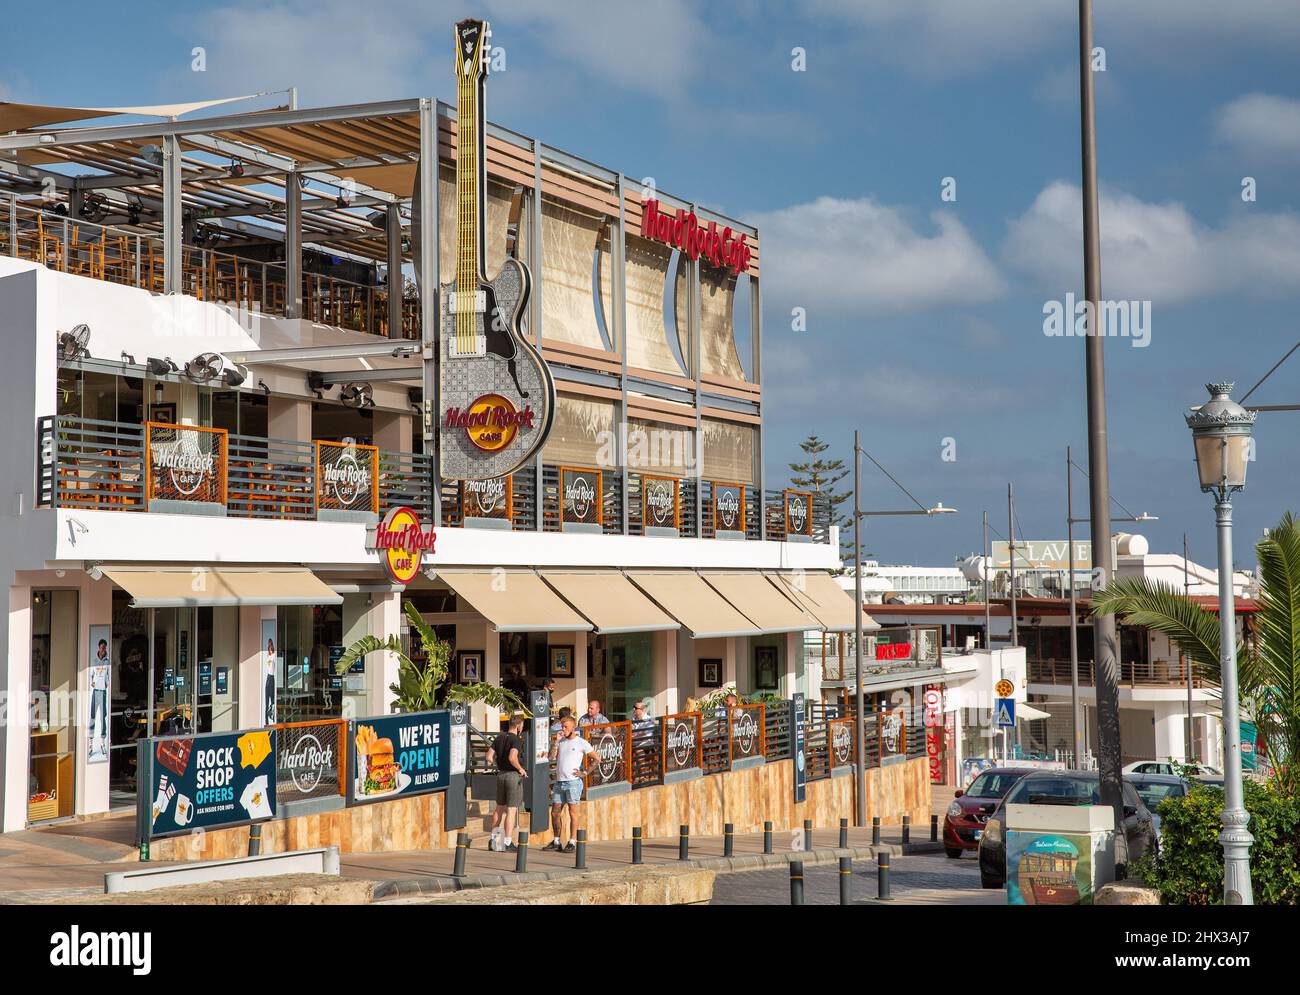 Ayia Napa, Cyprus - May 28, 2021: Hard Rock cafe building. It is a chain of theme restaurants founded 1971 in London. In 1979, the cafe began covering Stock Photo